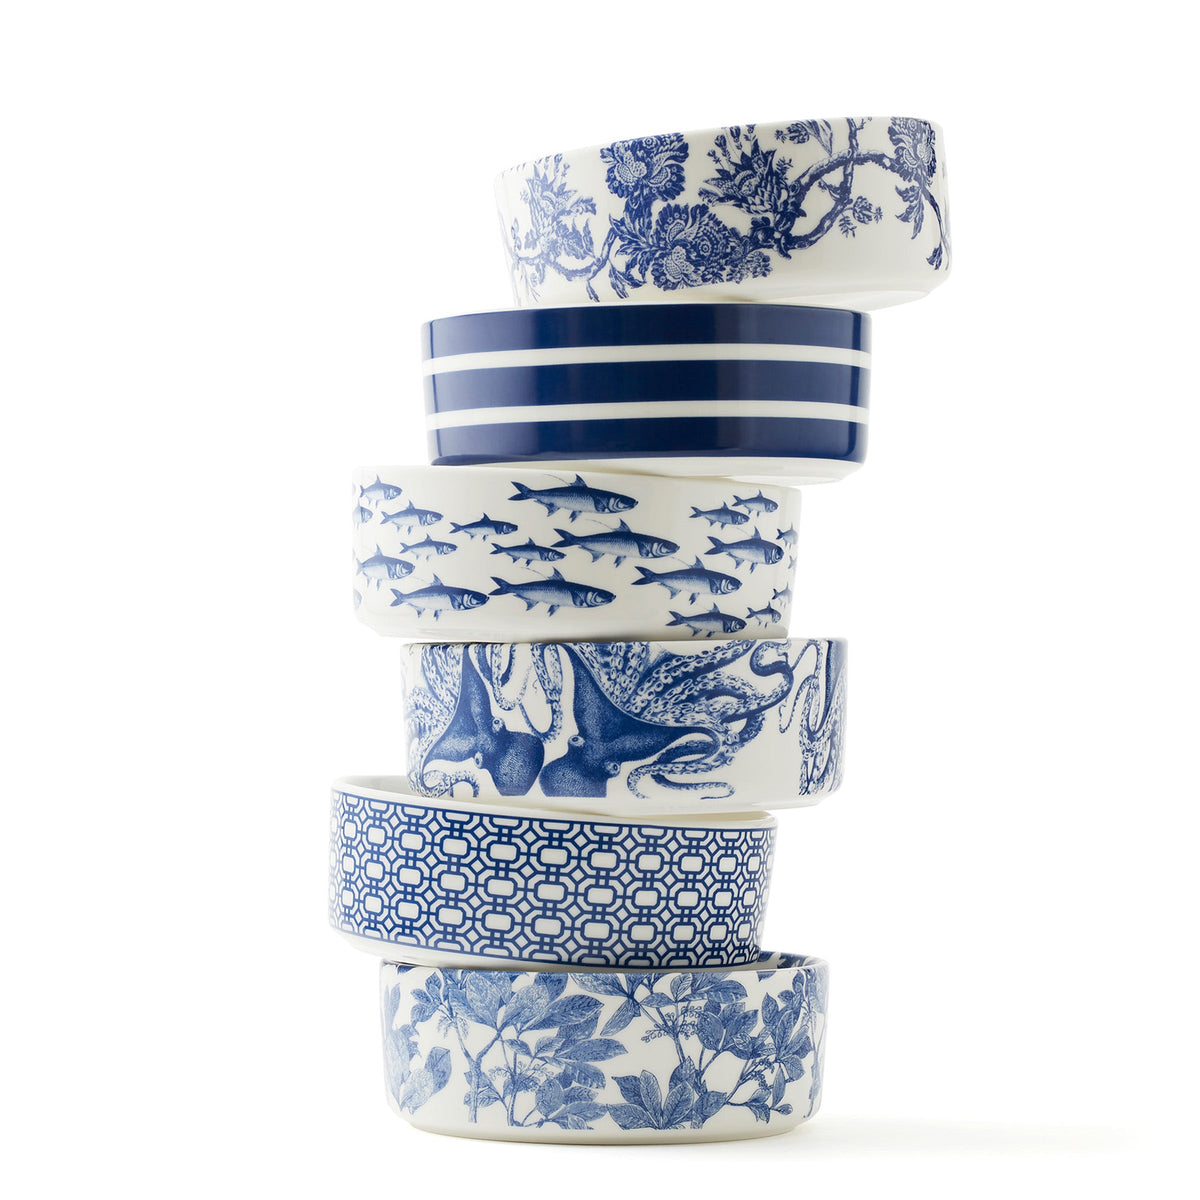 A stack of Caskata School of Fish Large Pet Bowls with blue and white fish designs.